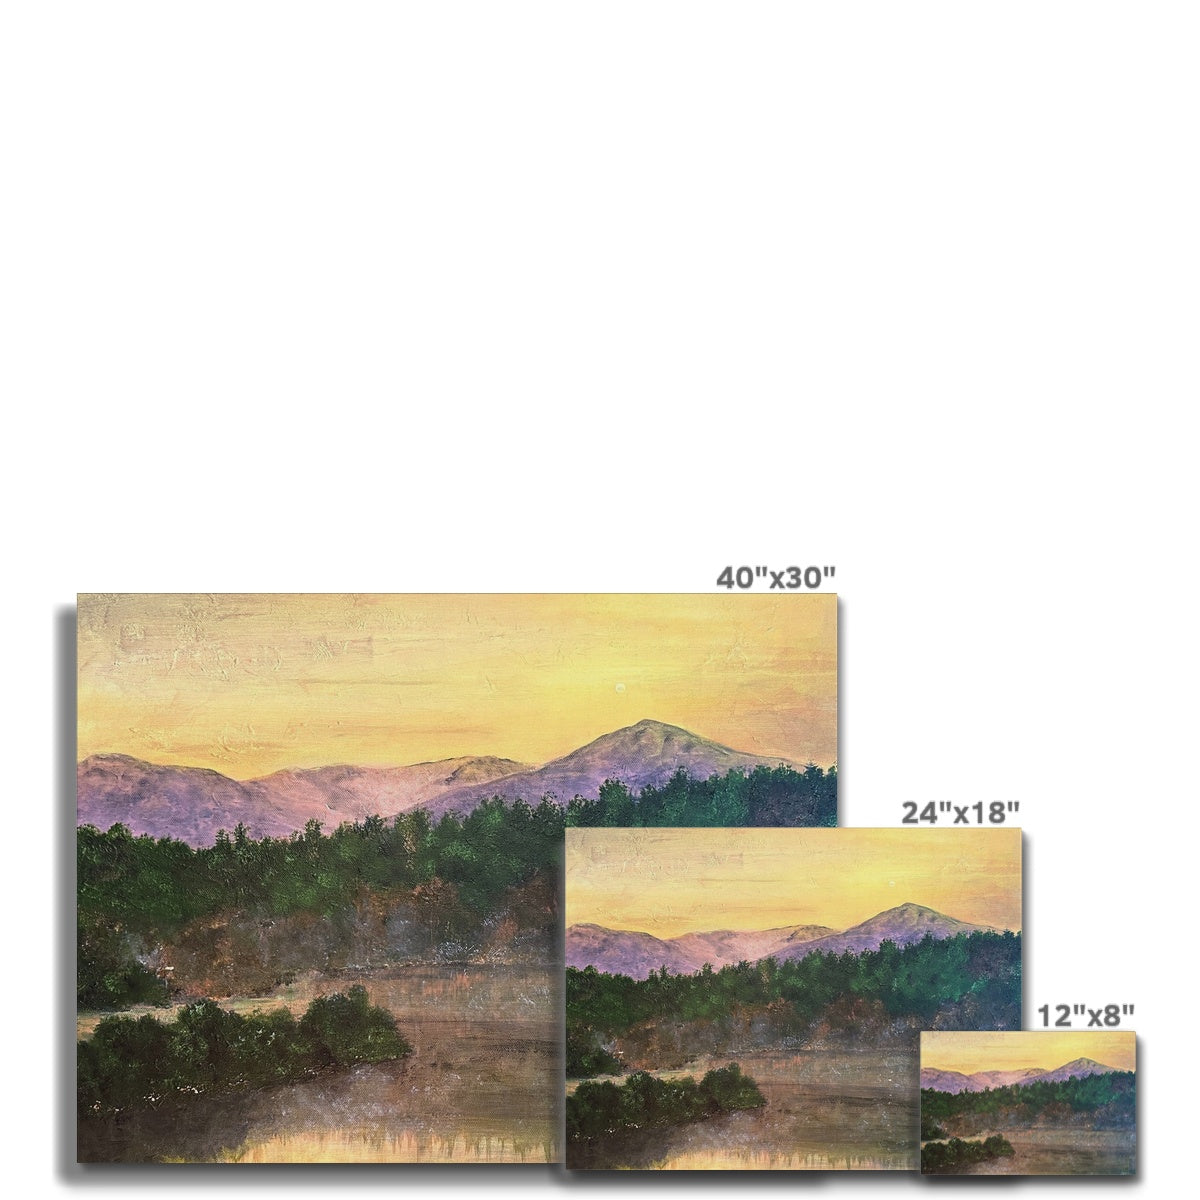 Ben Tee Invergarry Painting | Canvas From Scotland-Contemporary Stretched Canvas Prints-Scottish Lochs & Mountains Art Gallery-Paintings, Prints, Homeware, Art Gifts From Scotland By Scottish Artist Kevin Hunter